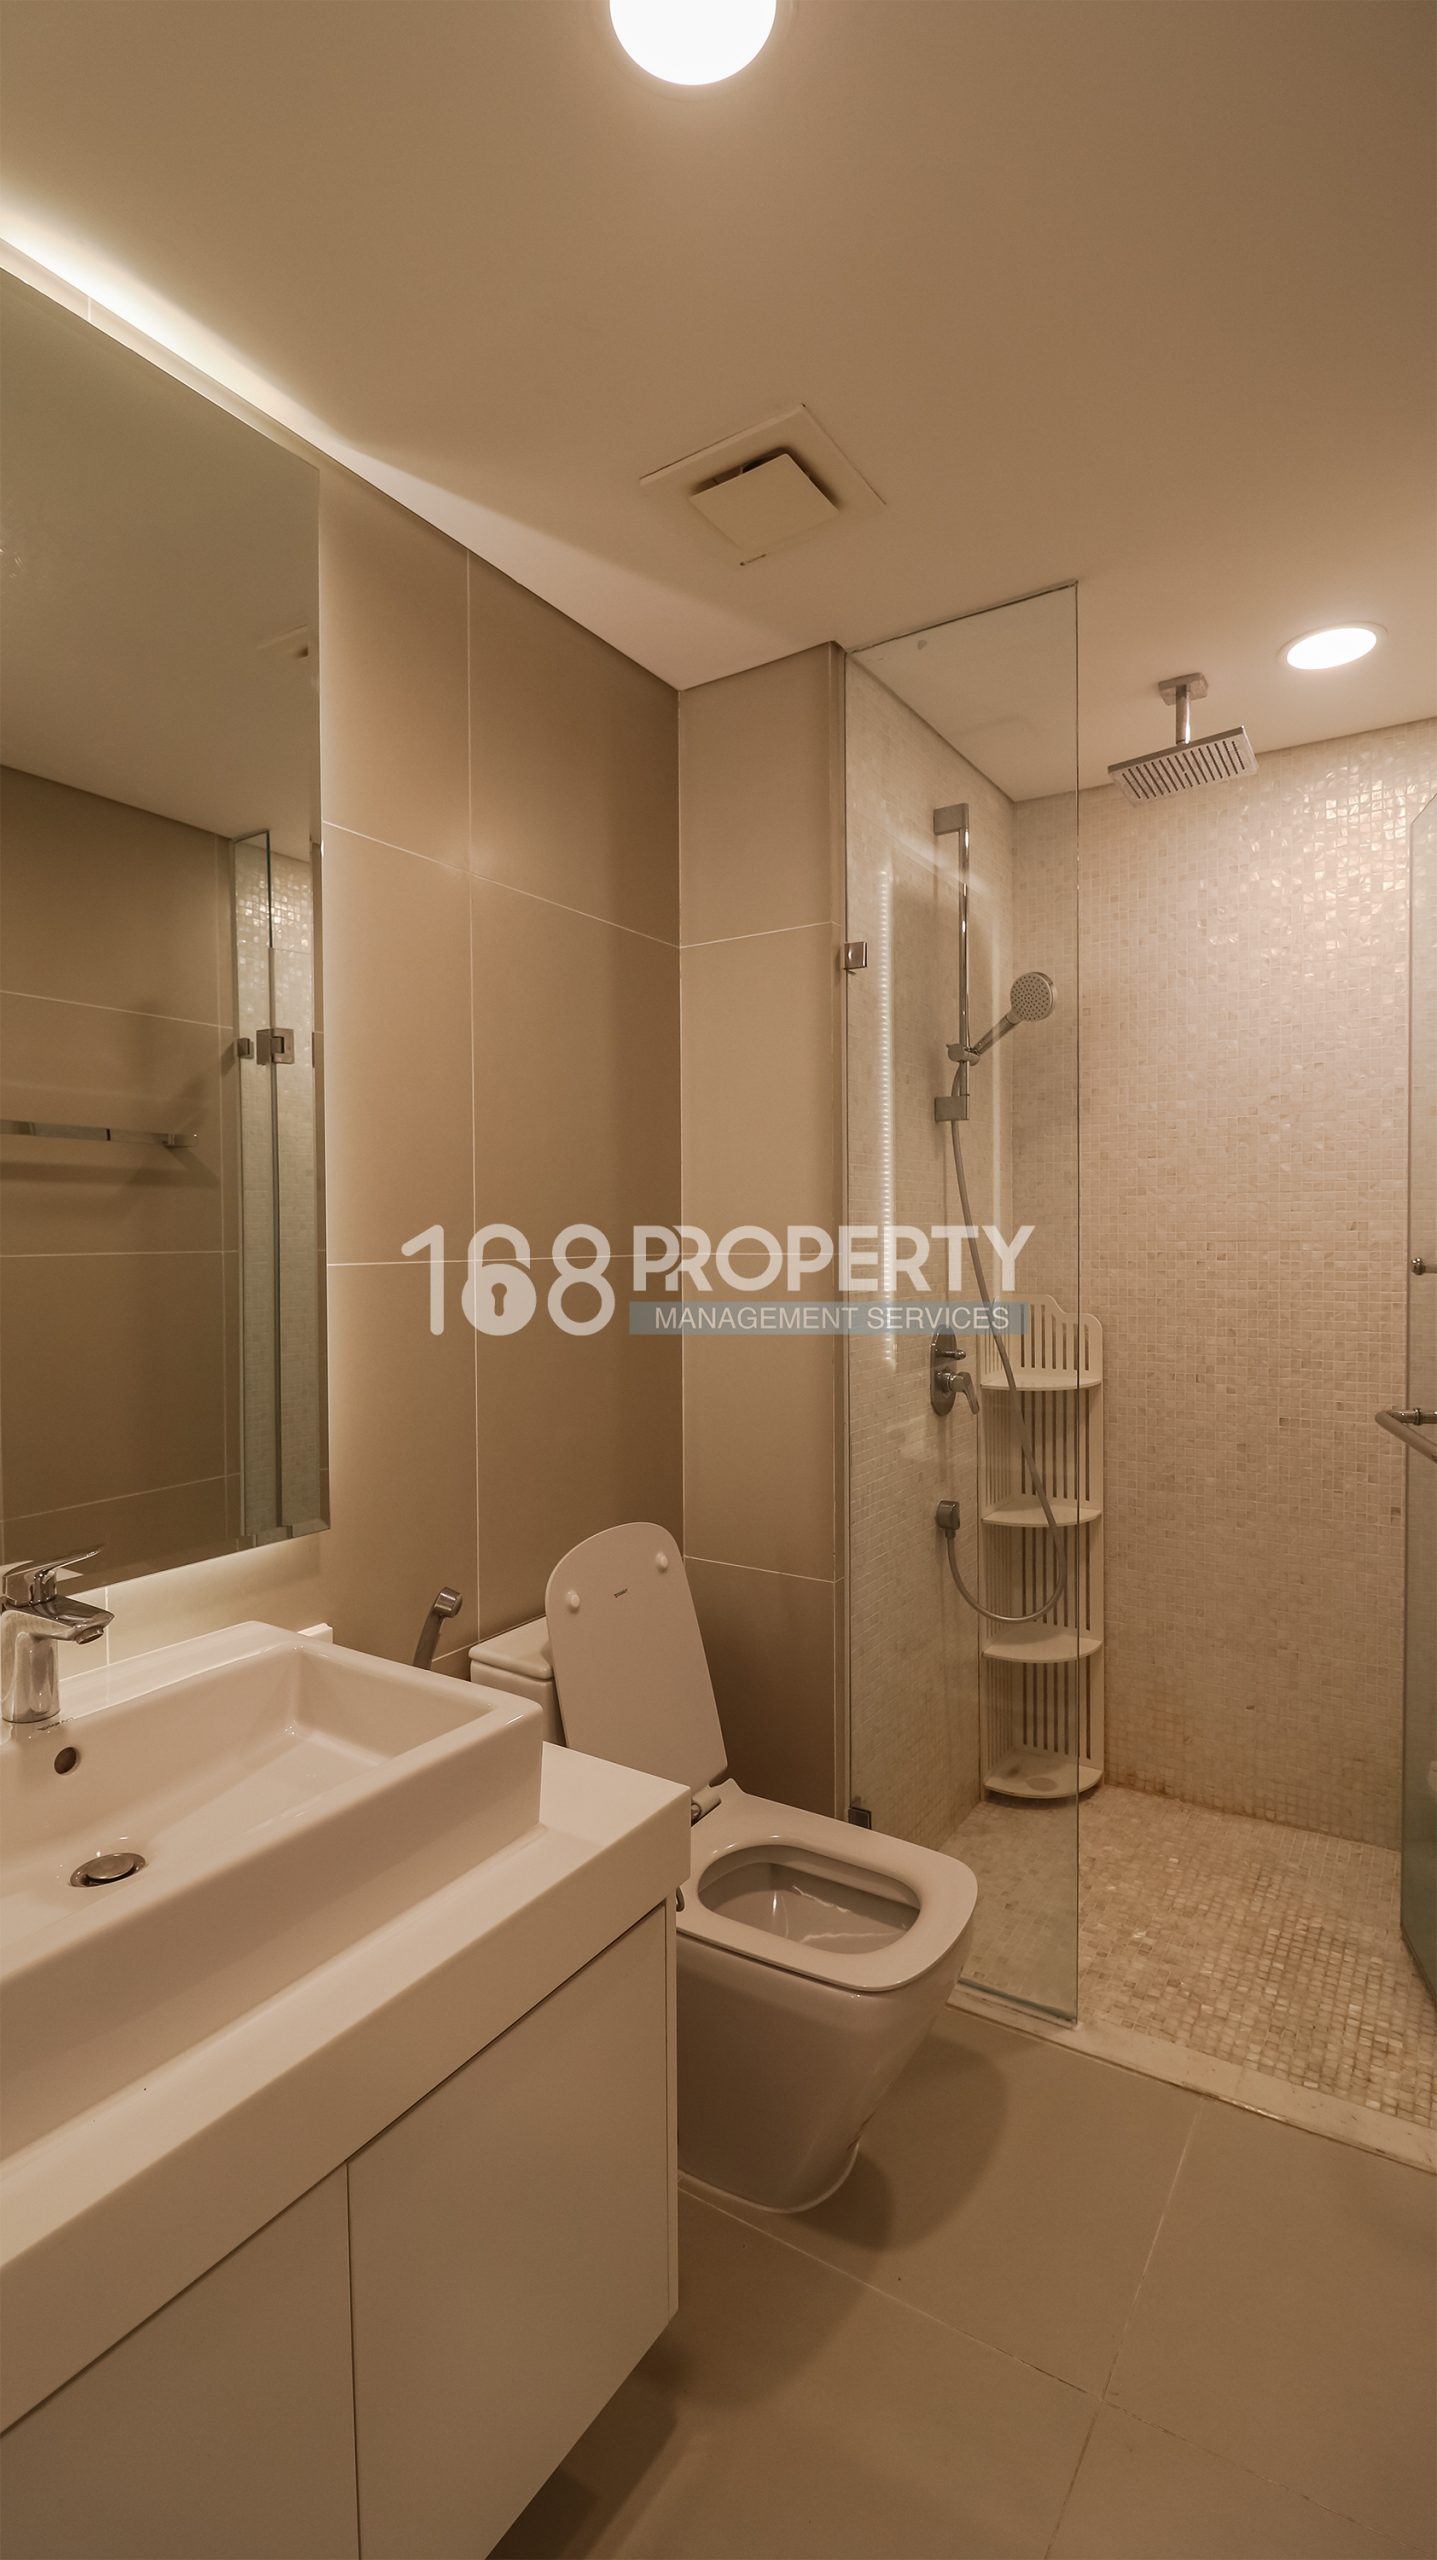 Gateway-thao-dien-apartment-for-rent-168-property